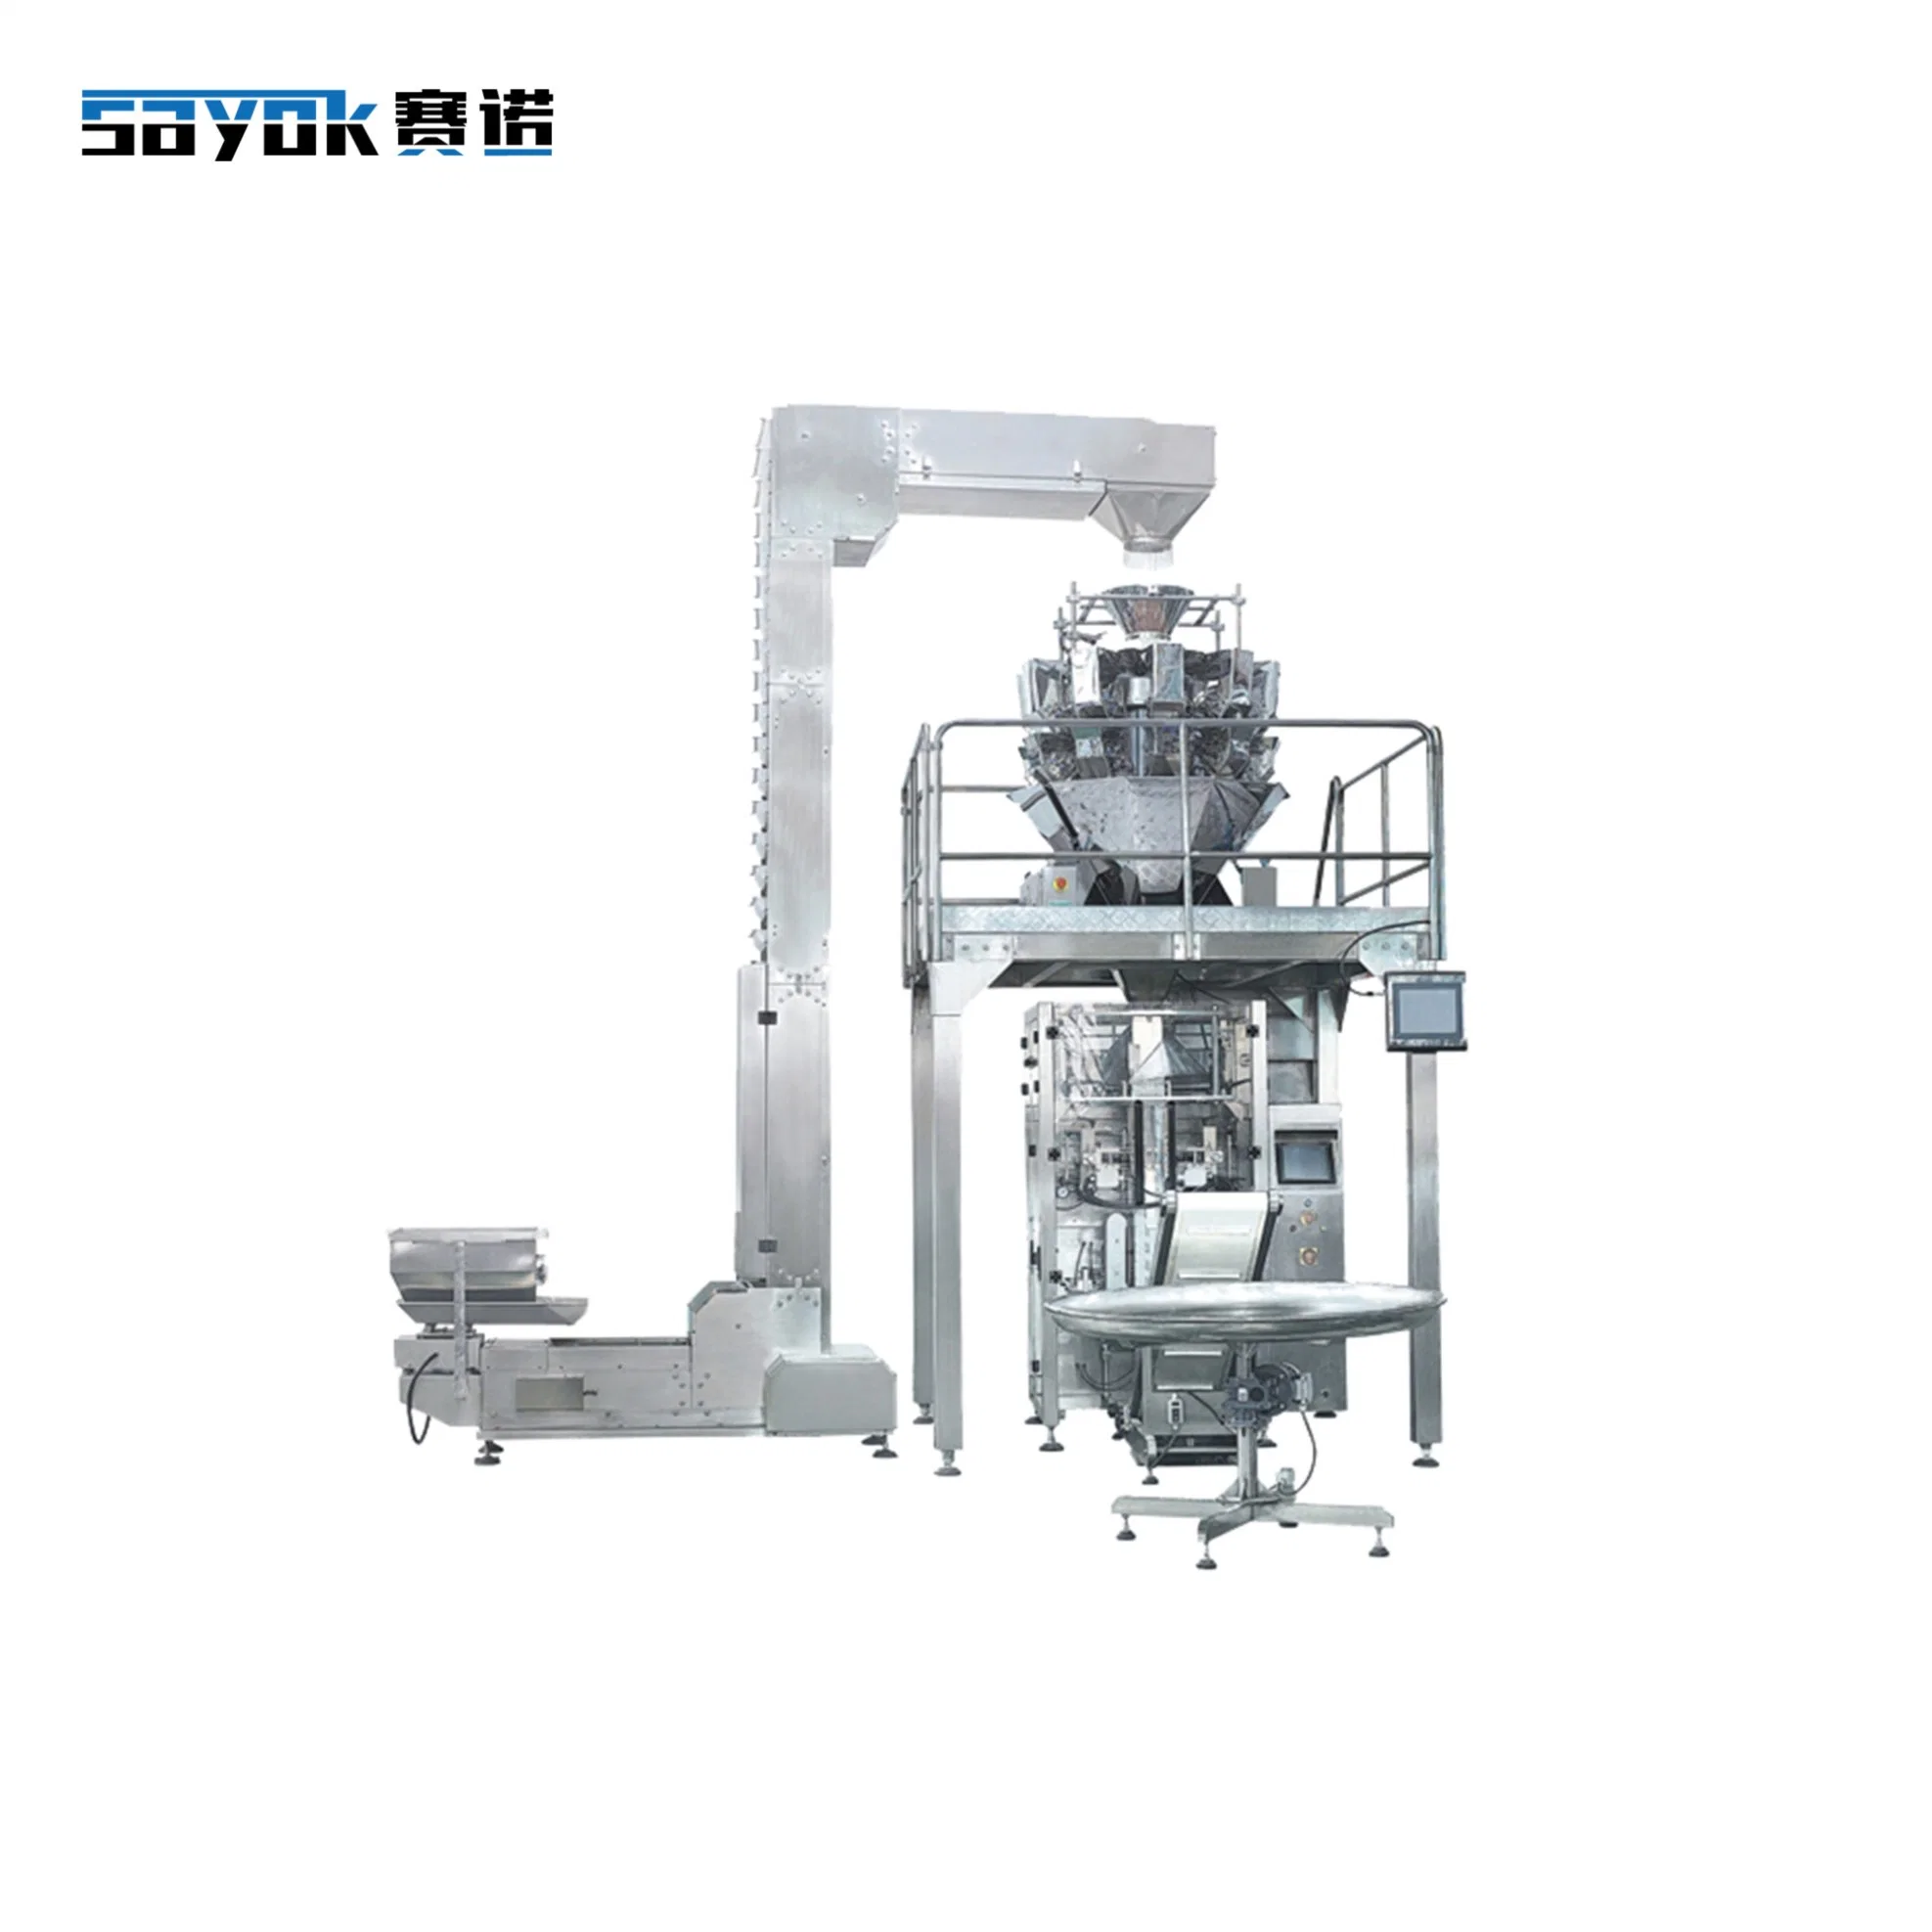 Filling Machines Automatic Vertical Packing Machine with Multi Heads Weigher Other Packaging Machines Meat Sausage Packaging Machine